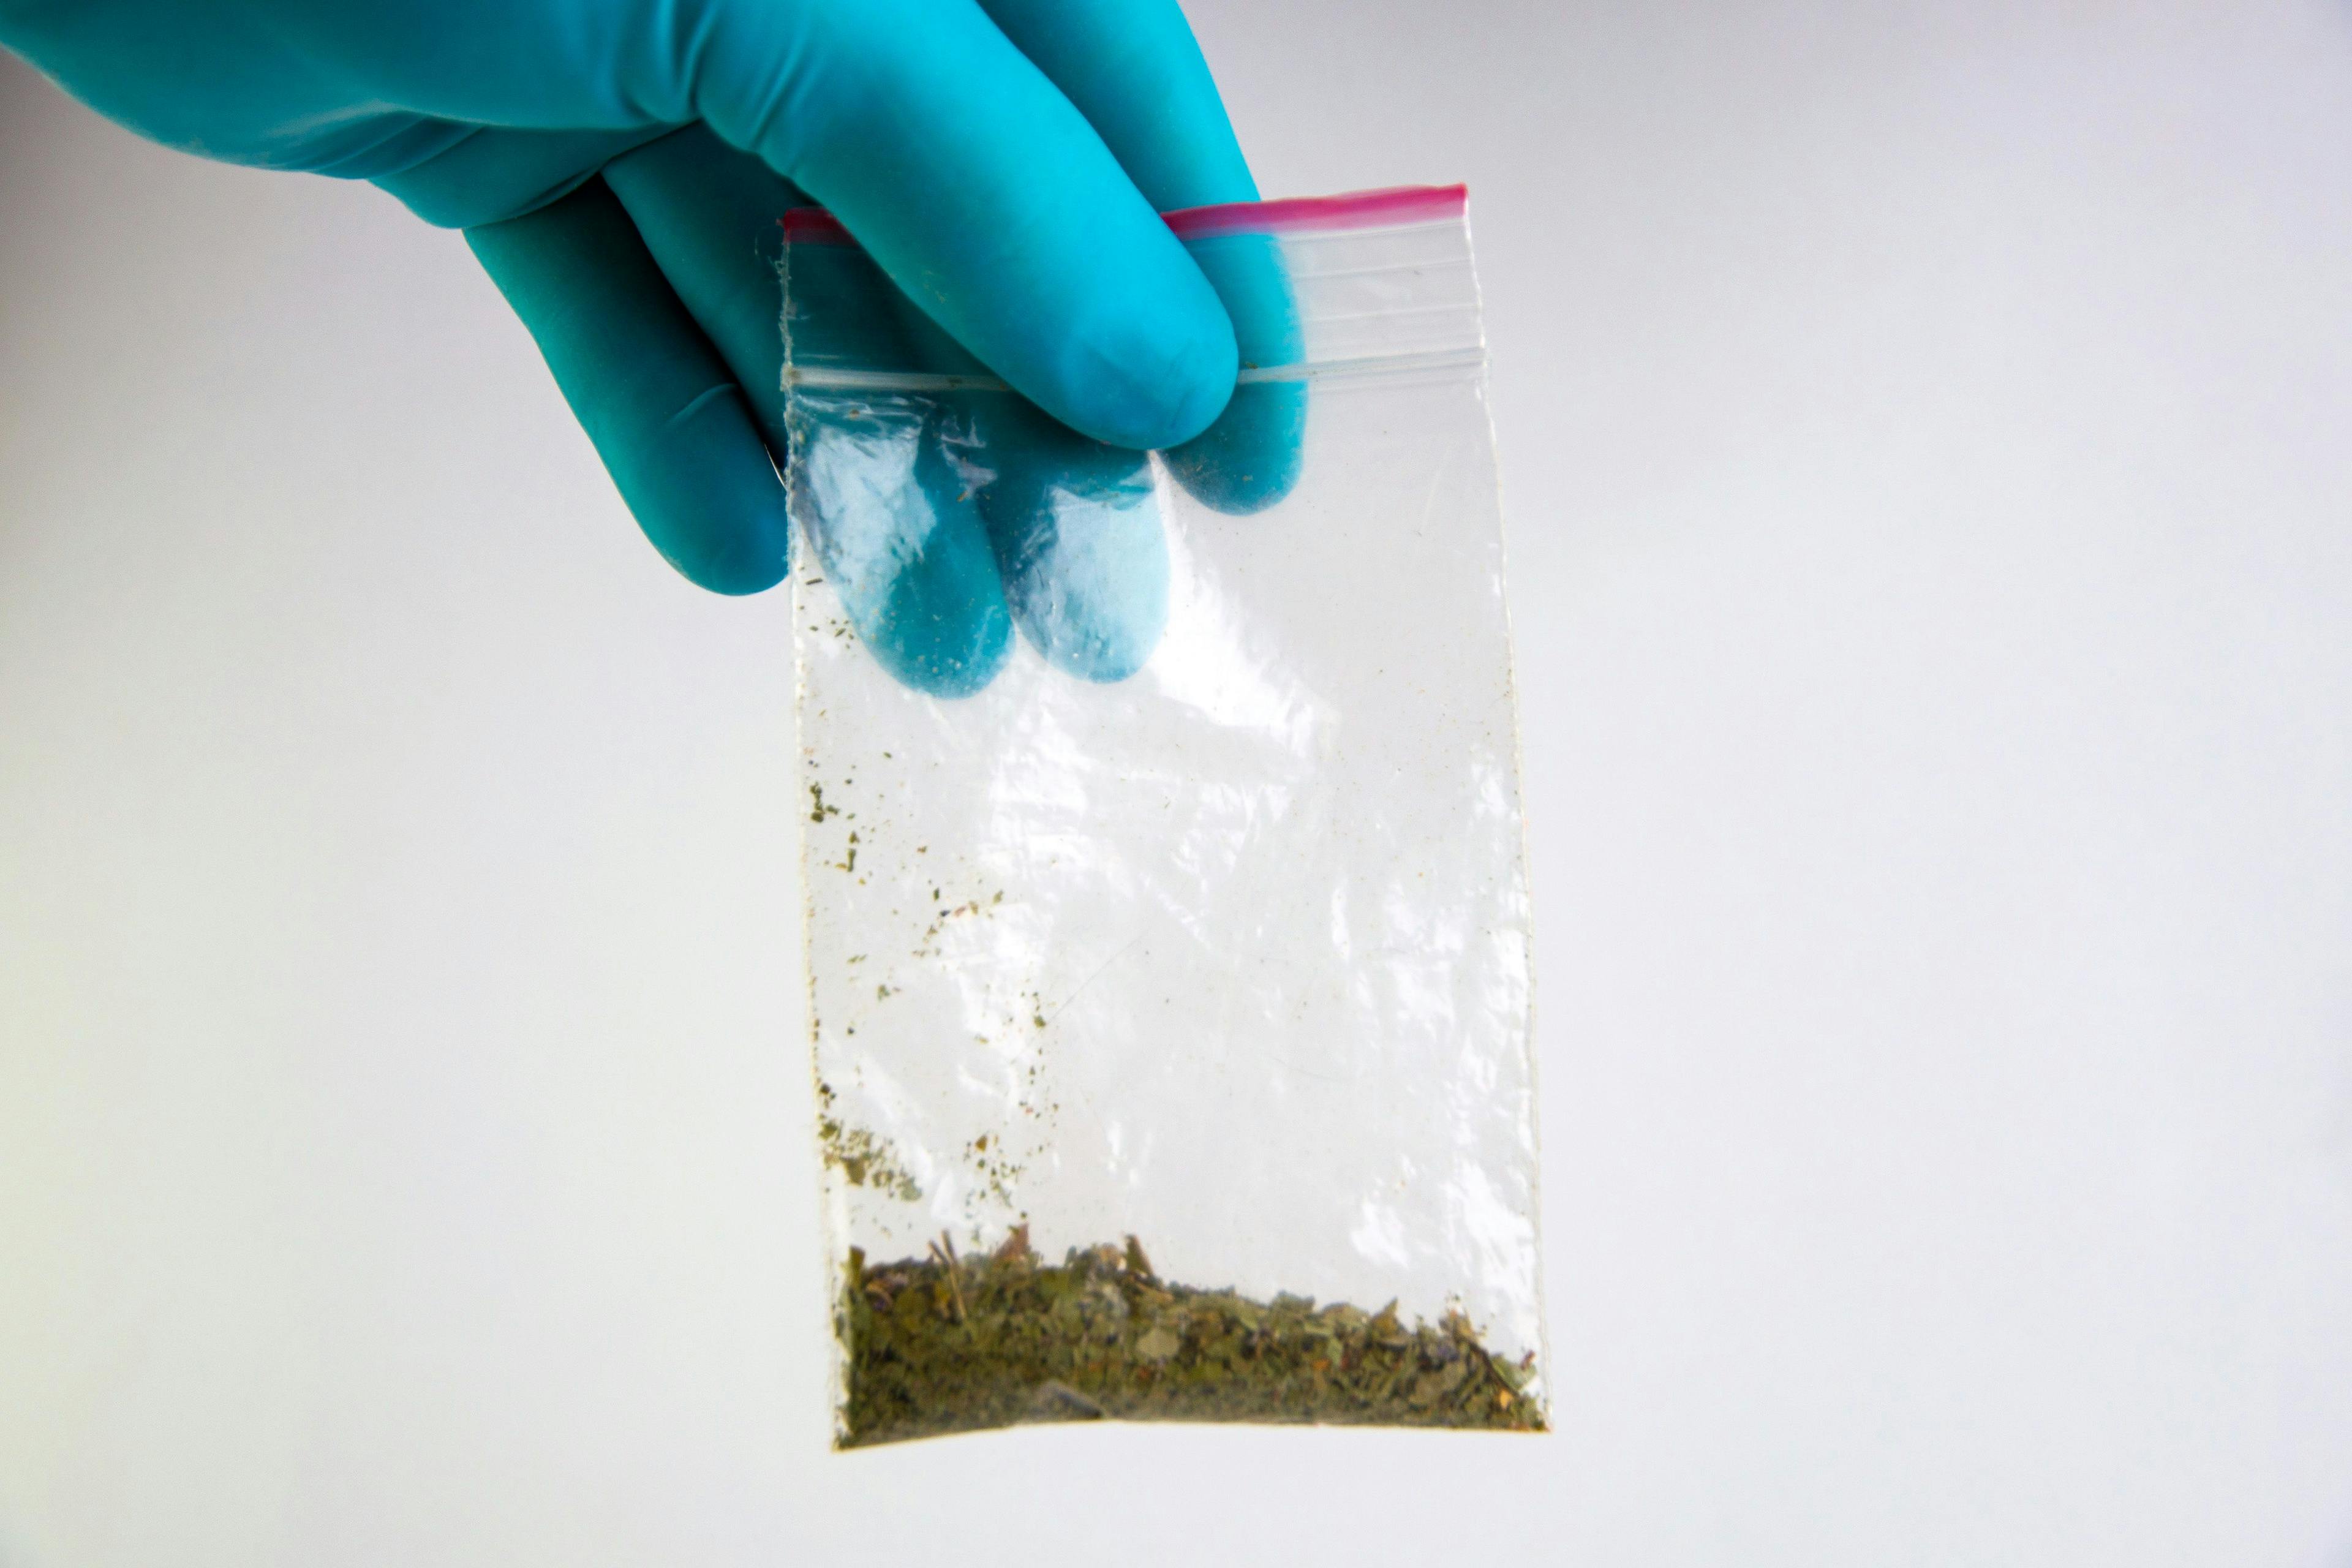 synthetic marijuana: laboratory technician holds samples of narcotic herbal medicines in hand | Image Credit: © BUSLIQ - stock.adobe.com